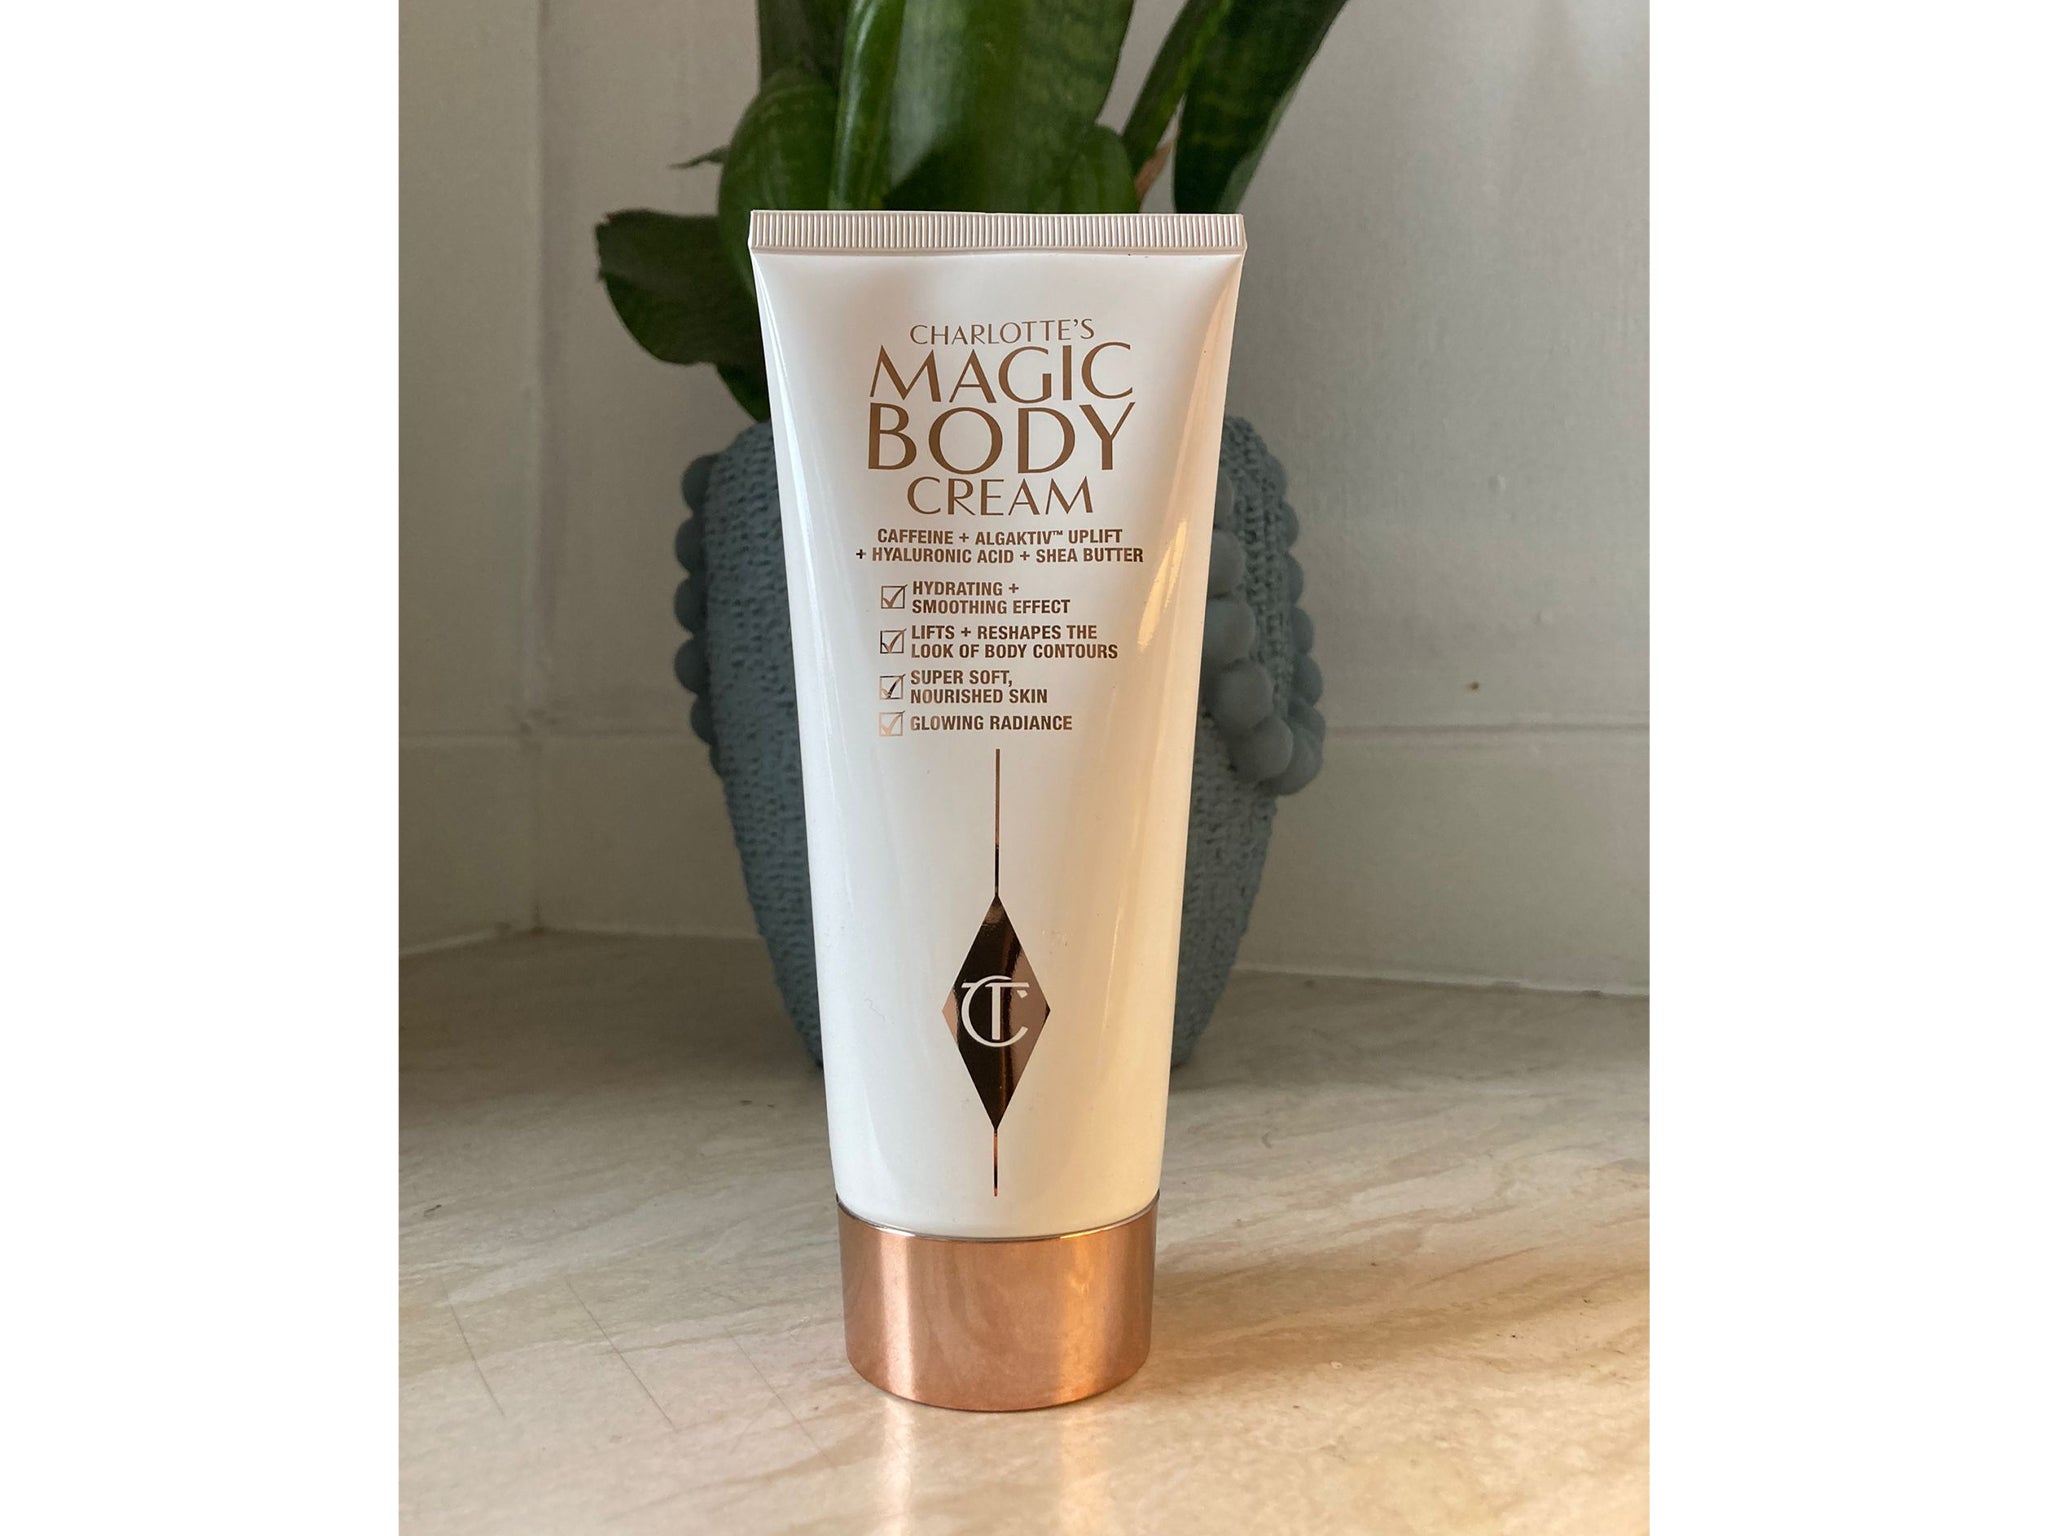 Charlotte Tilbury magic body cream review: Formula and results